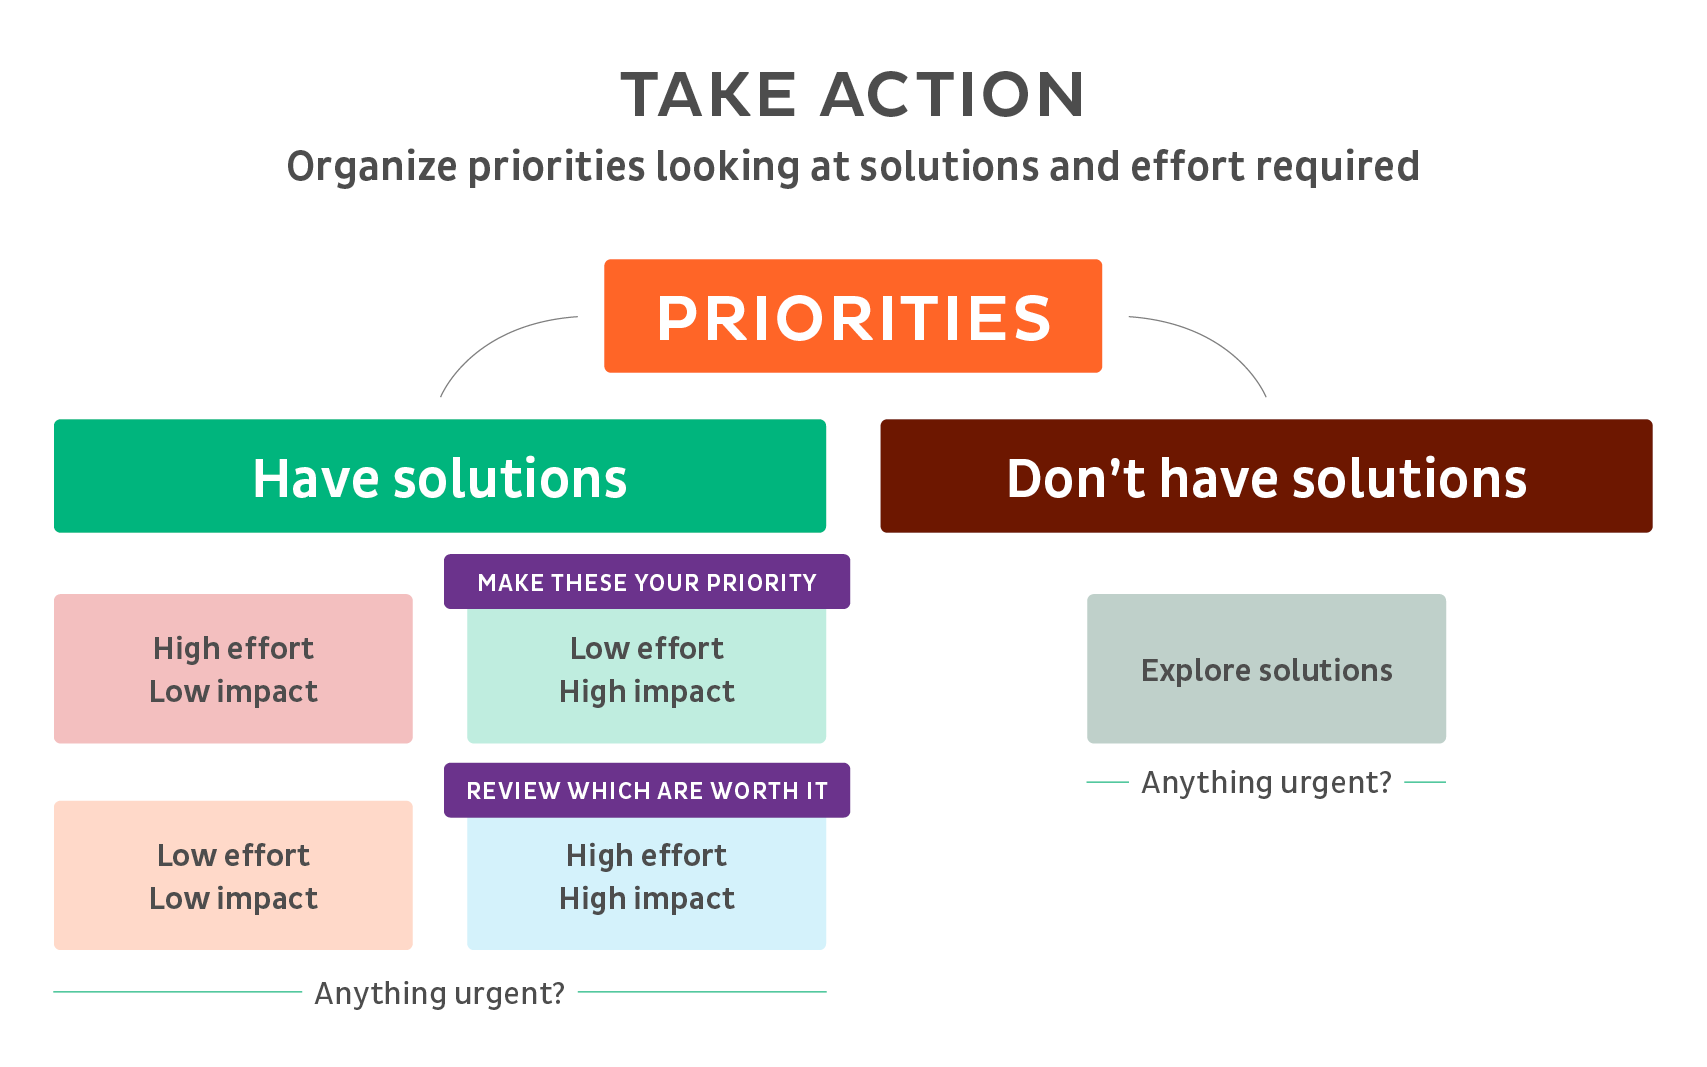 Take action - organise priorities looking at solutions and effort required